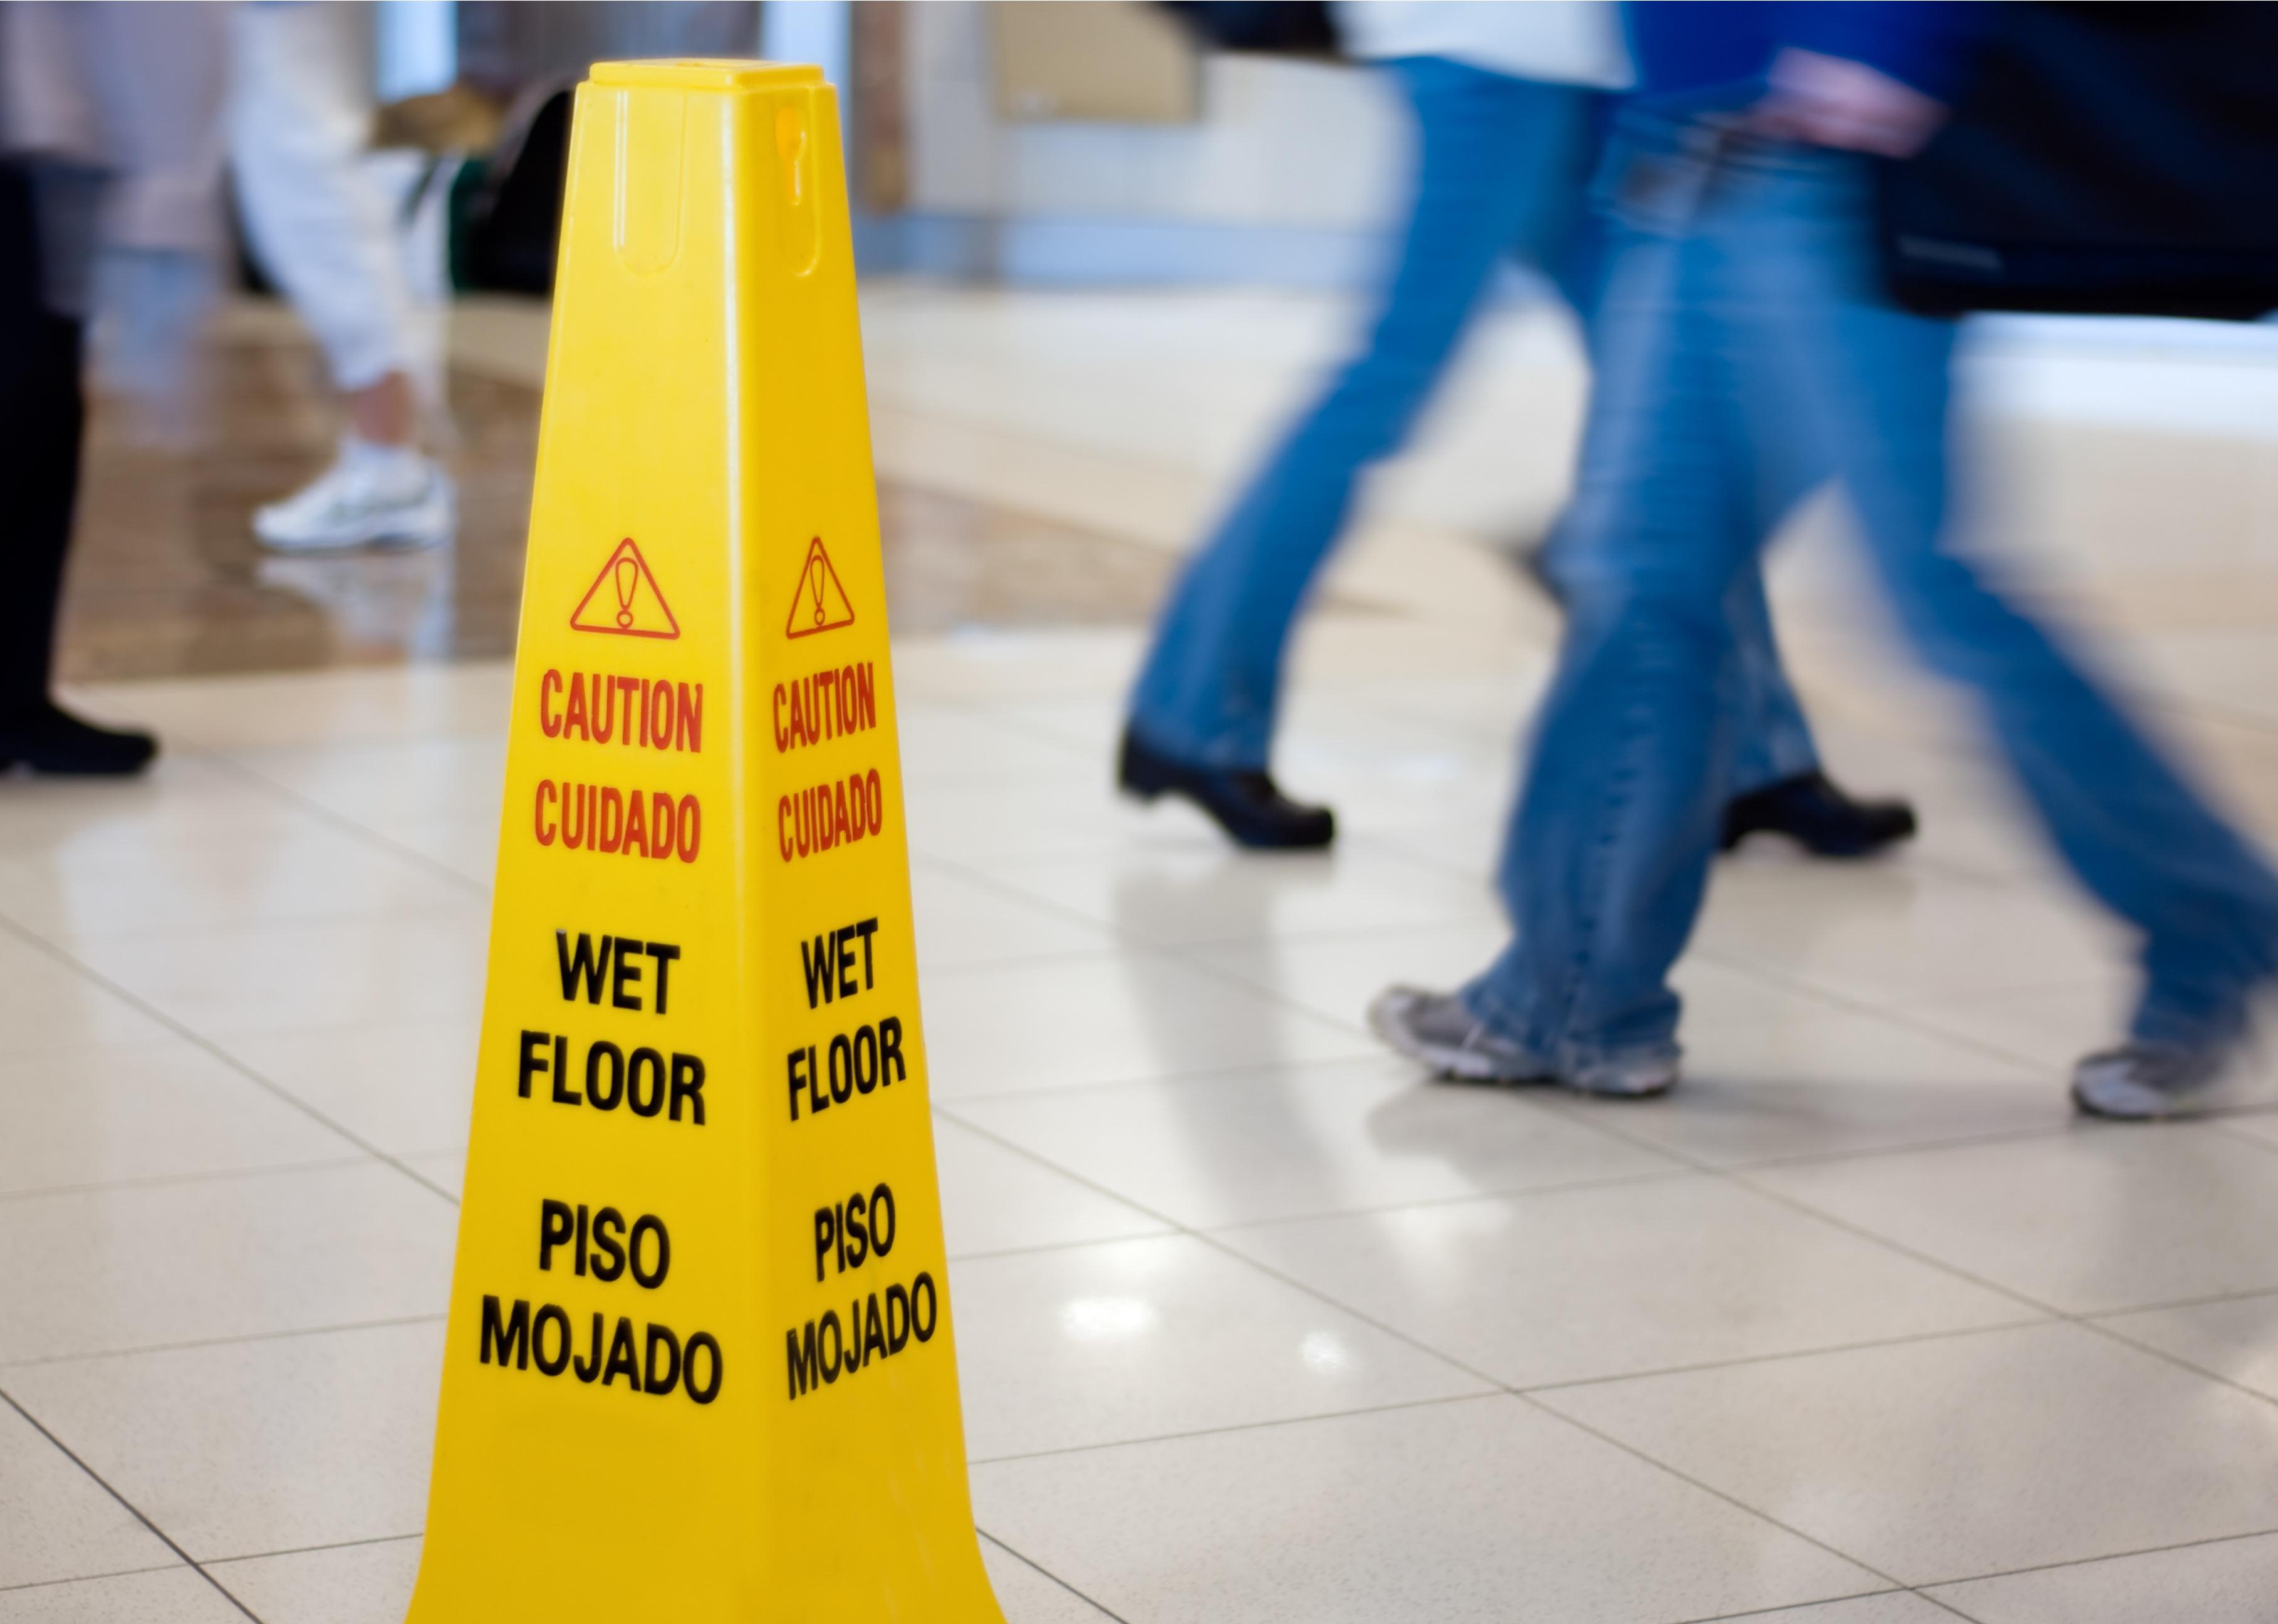 Caution Wet Floor sign with people walking in the background.